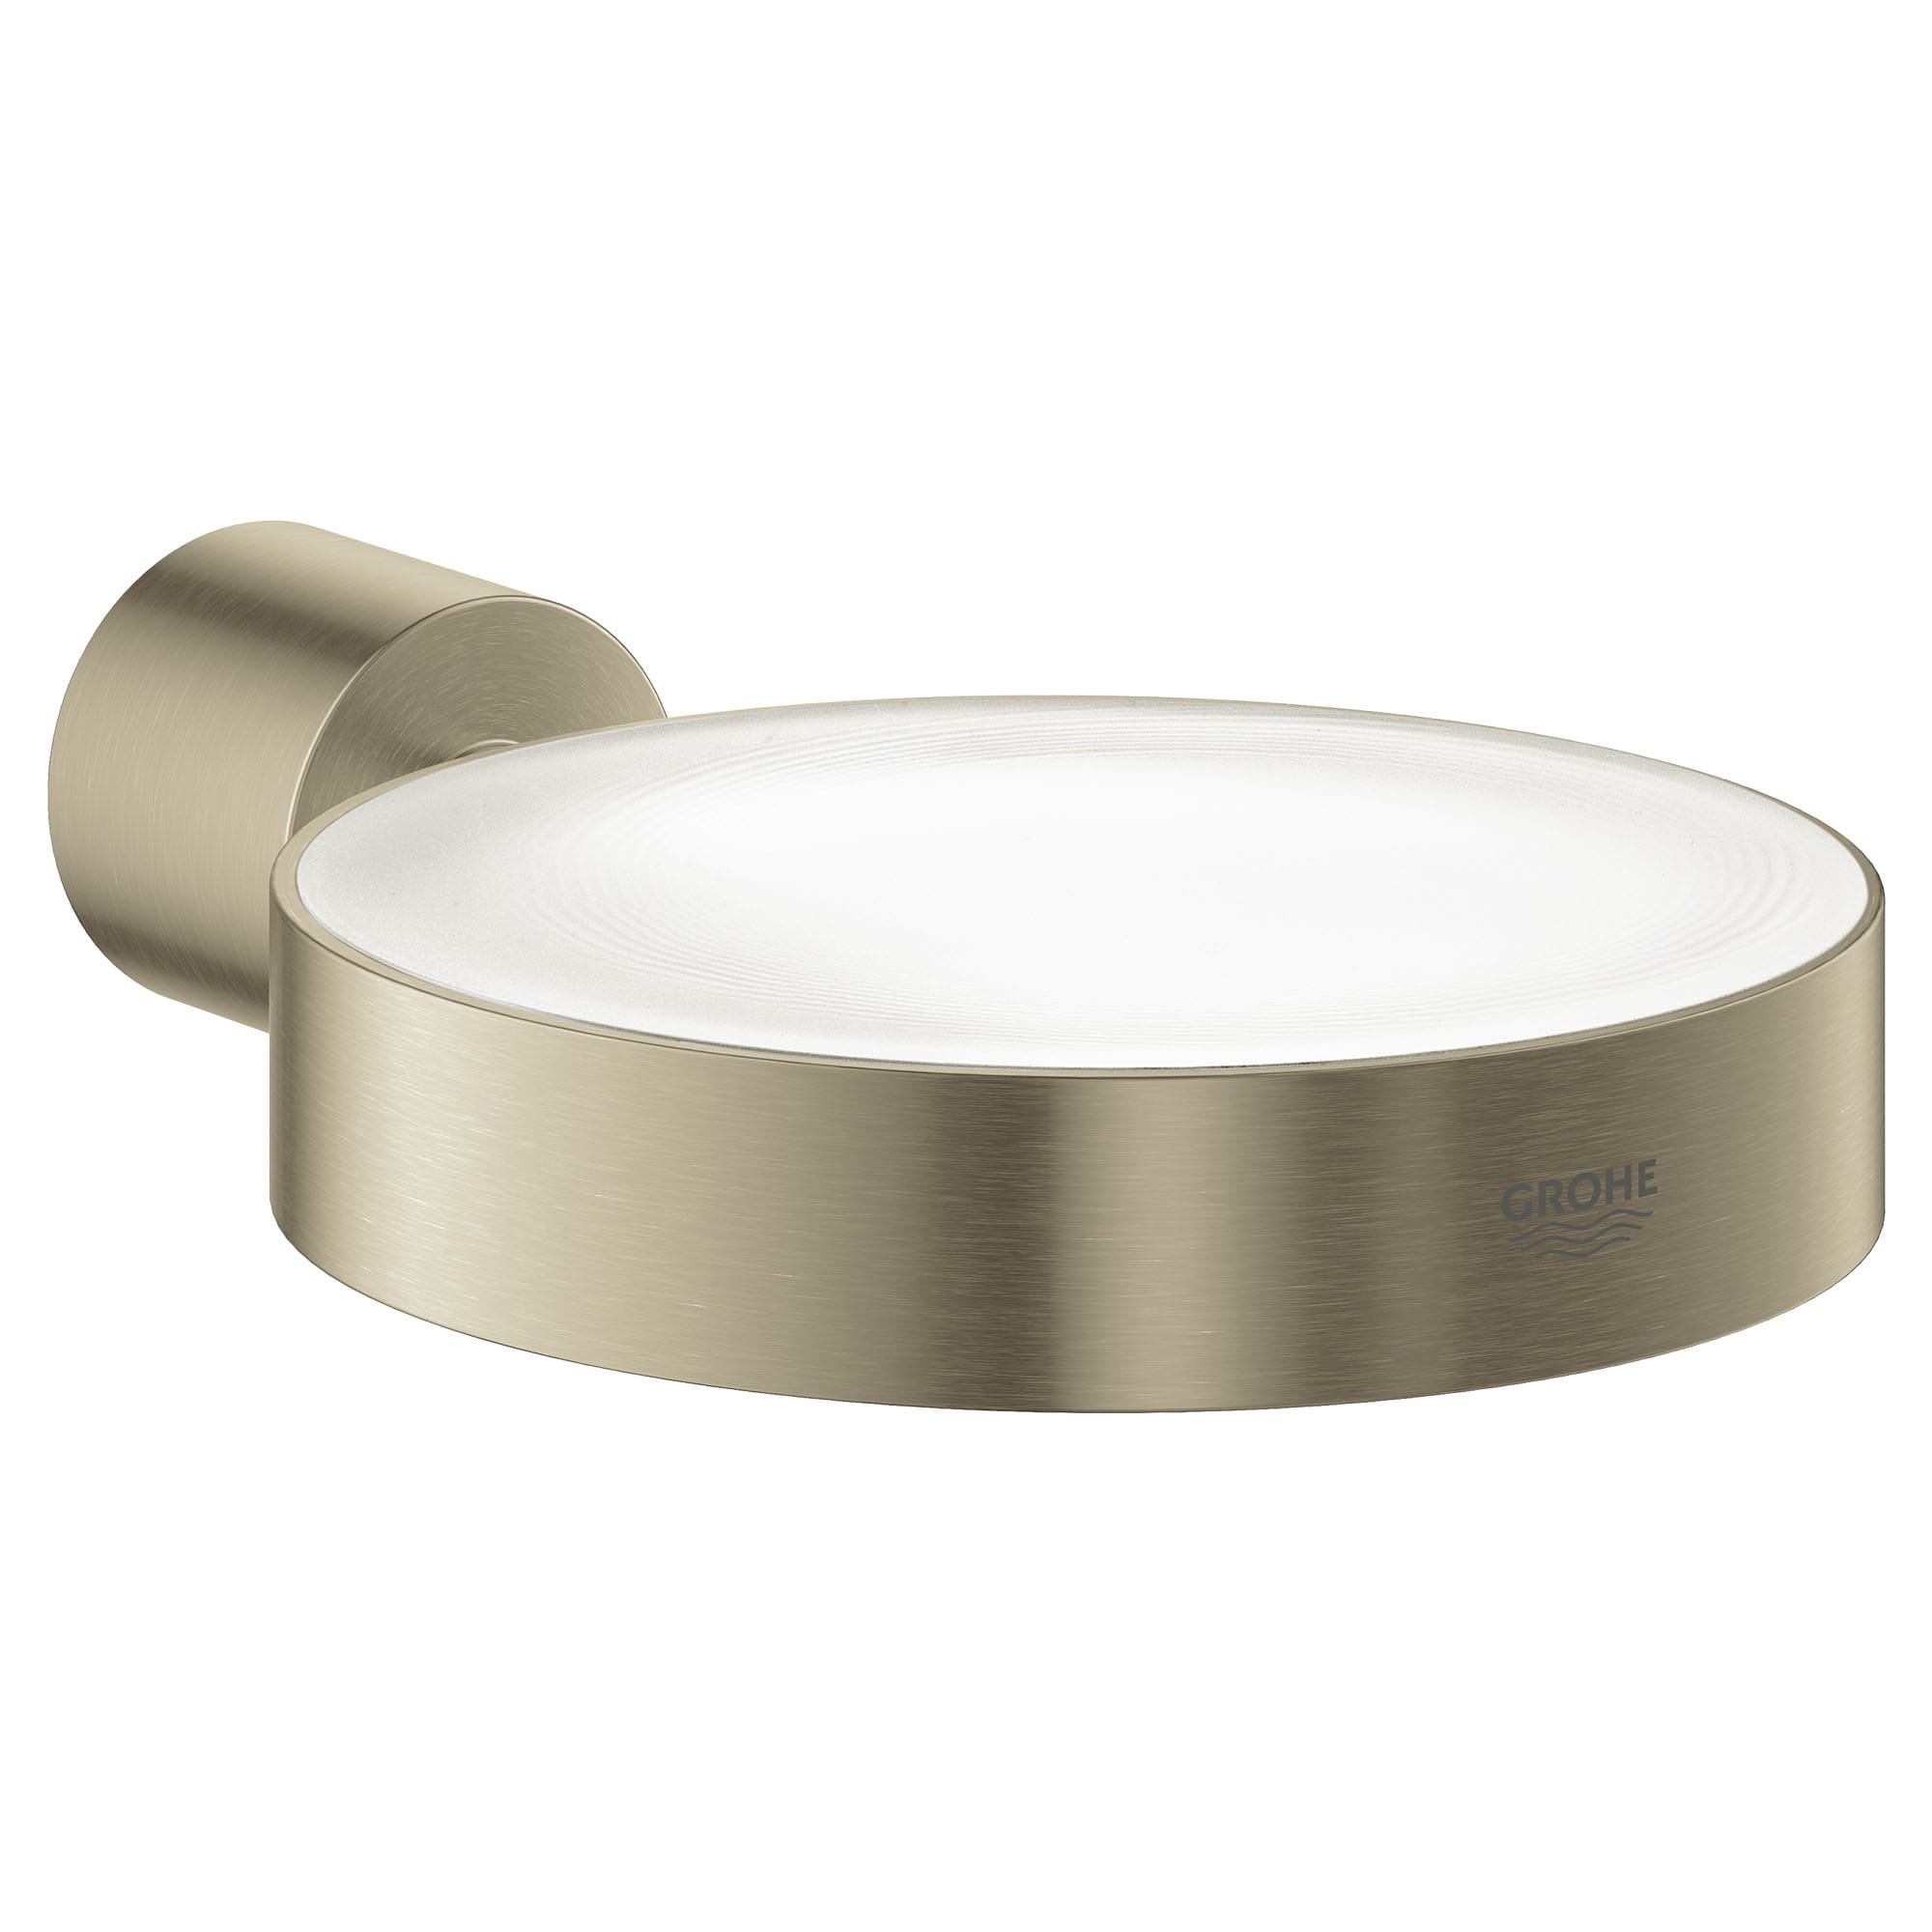 Support pour porte savon GROHE BRUSHED NICKEL